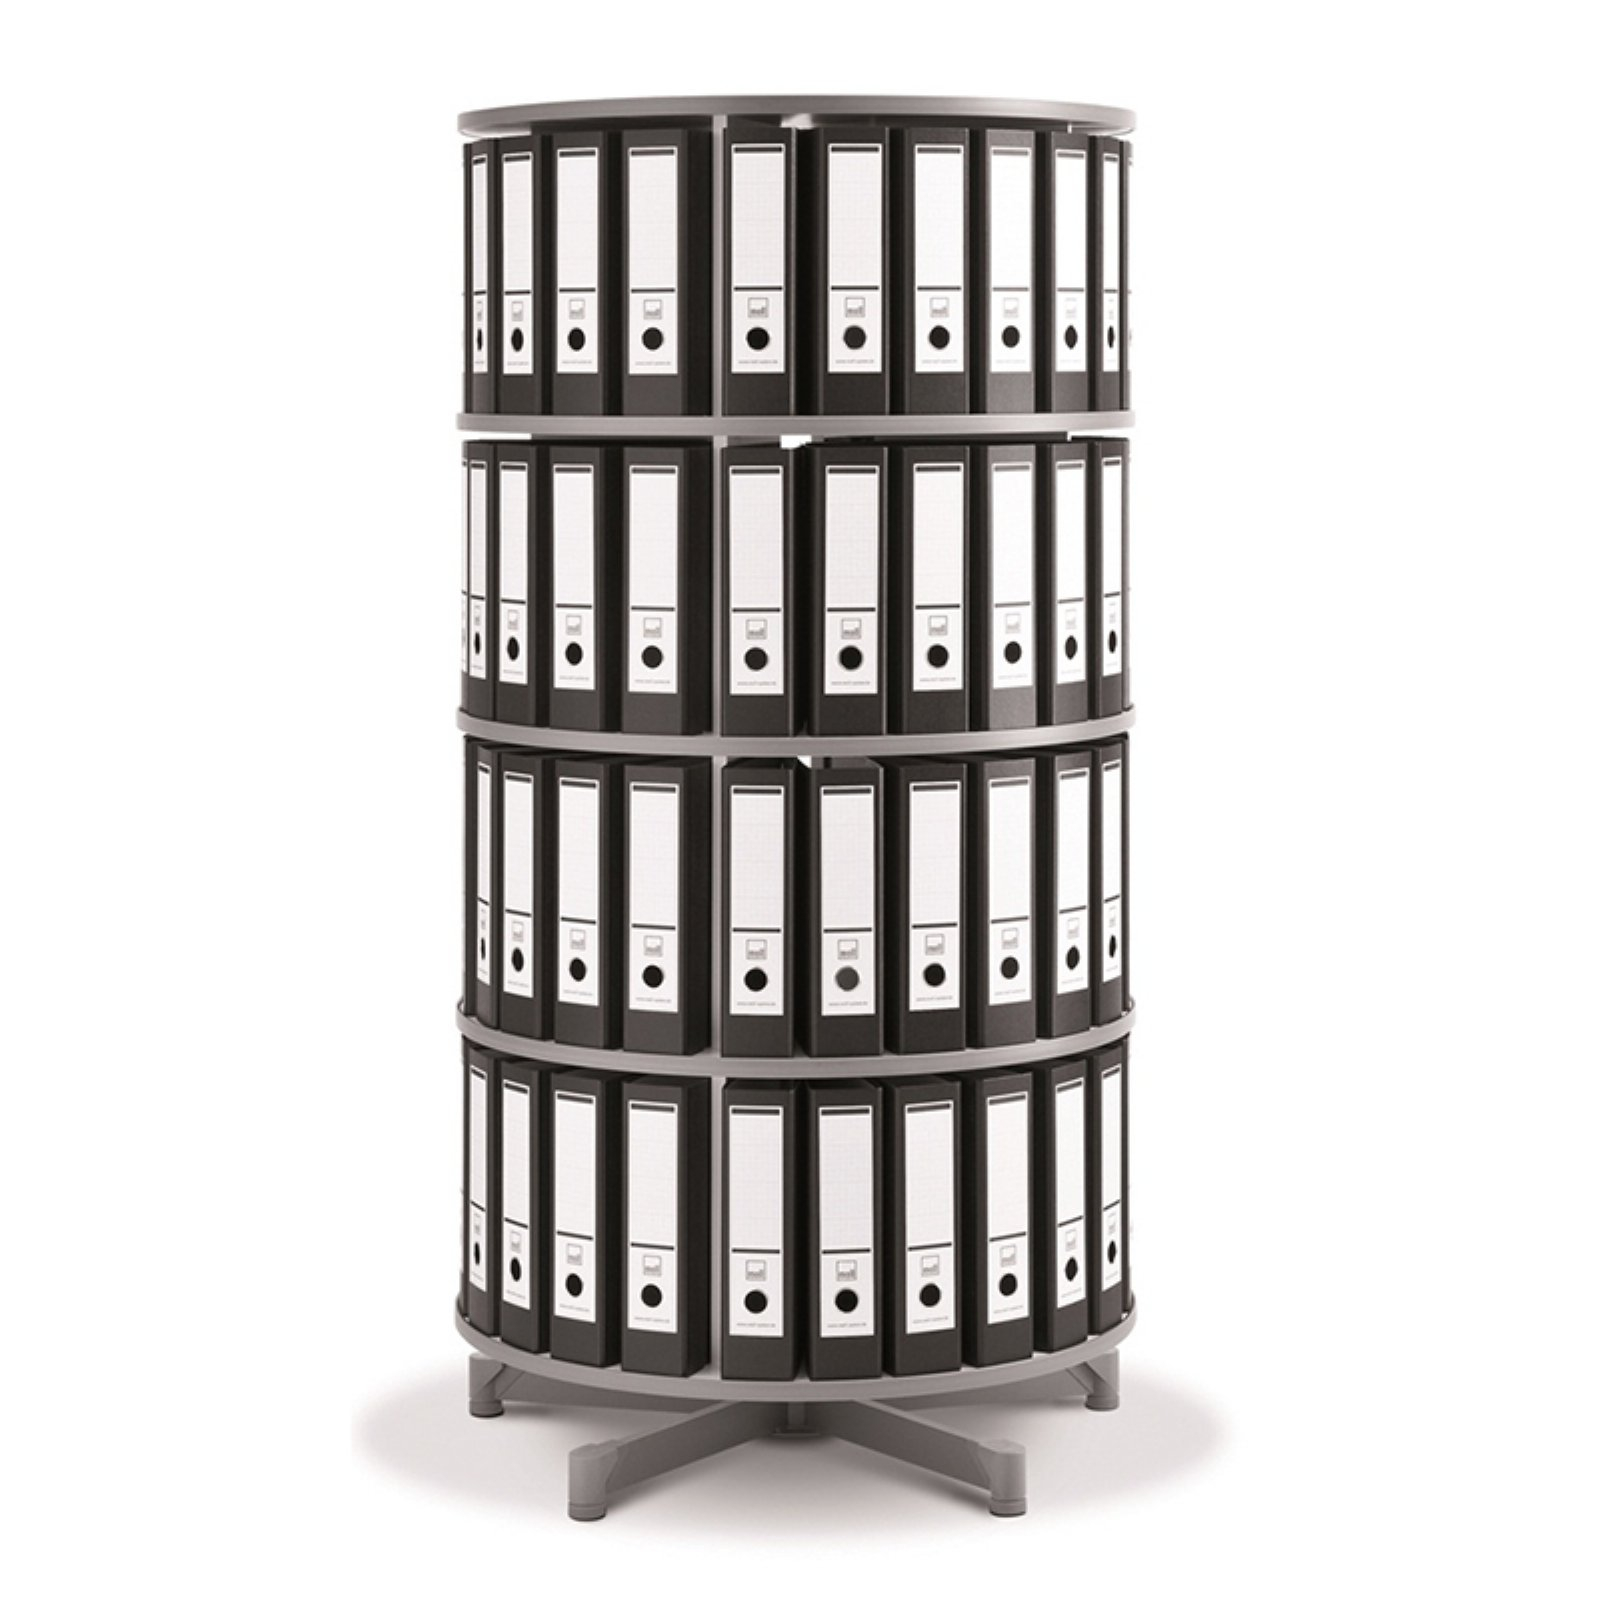 Spin N File Four Tier Rotary Binder Storage Carousel Products In within size 1600 X 1600